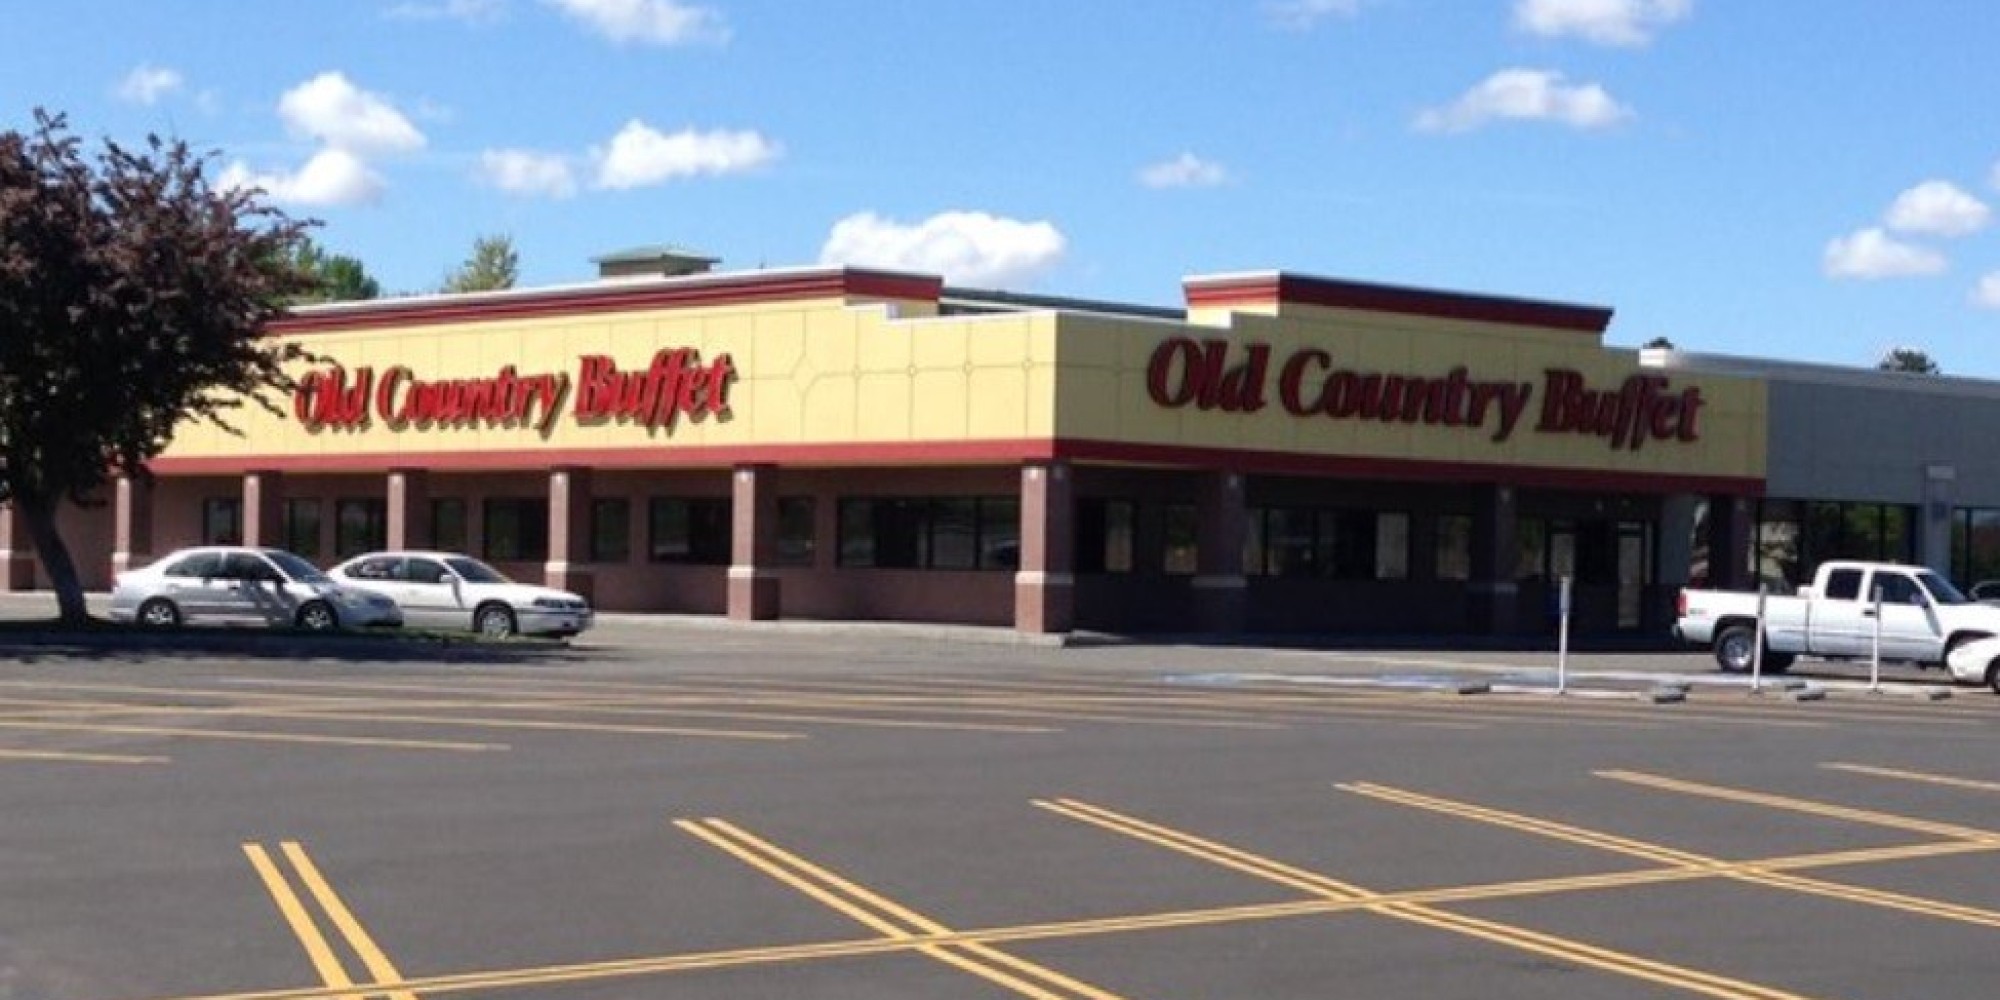 Old country buffet at ford city #8